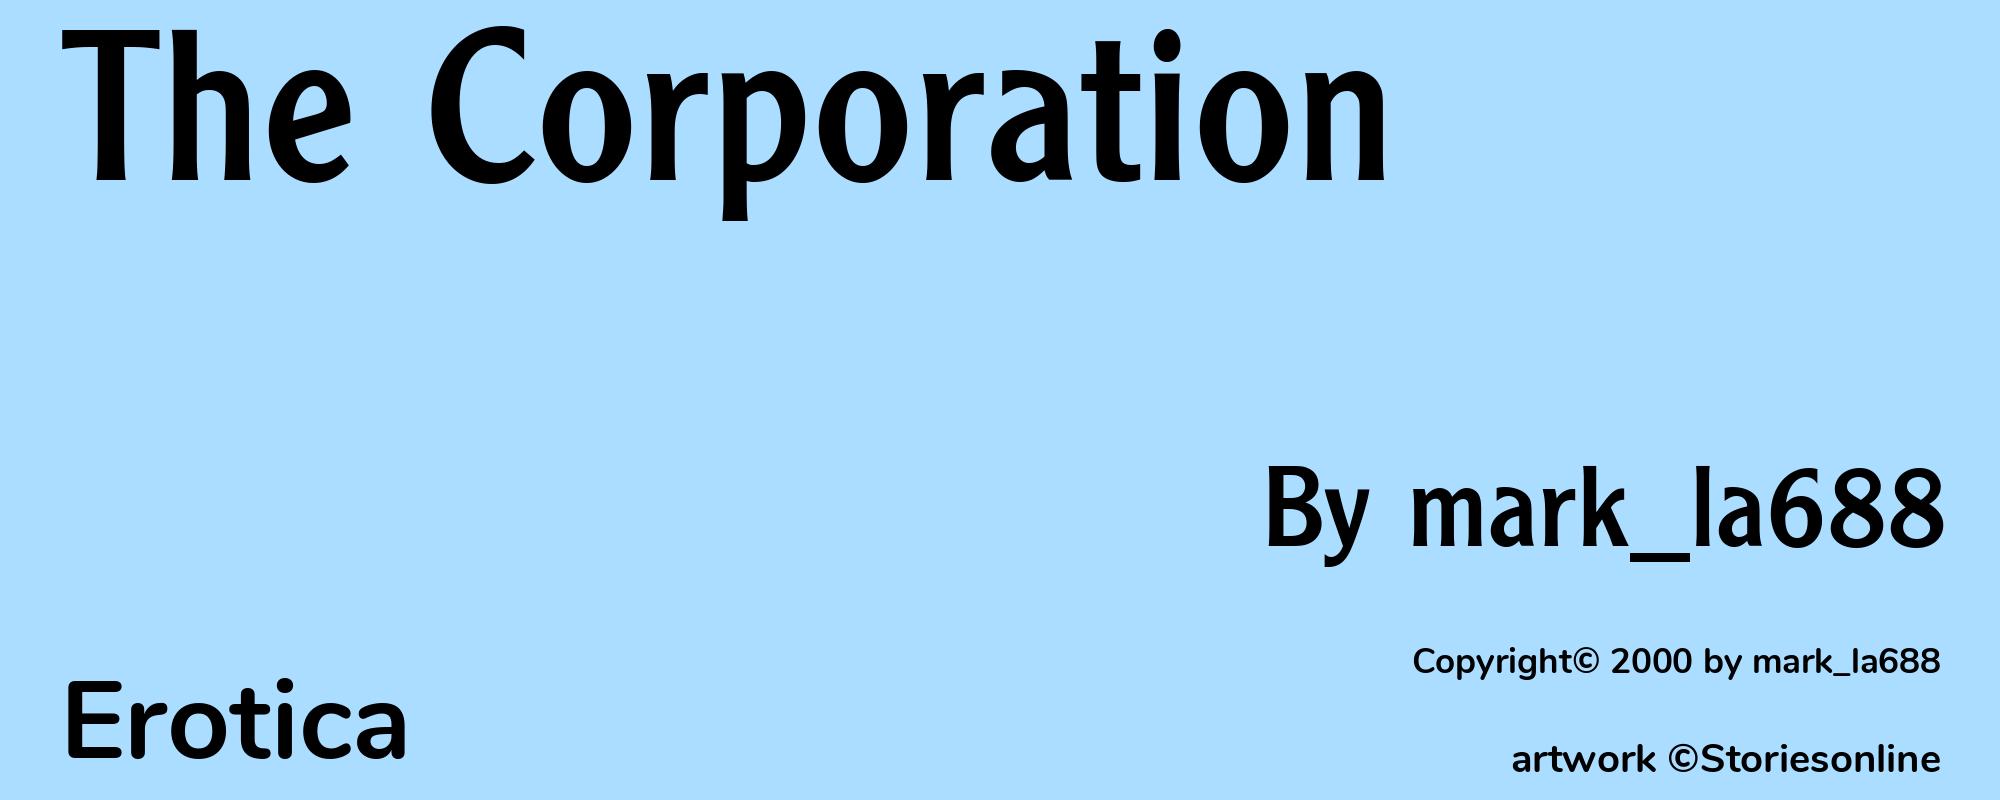 The Corporation - Cover